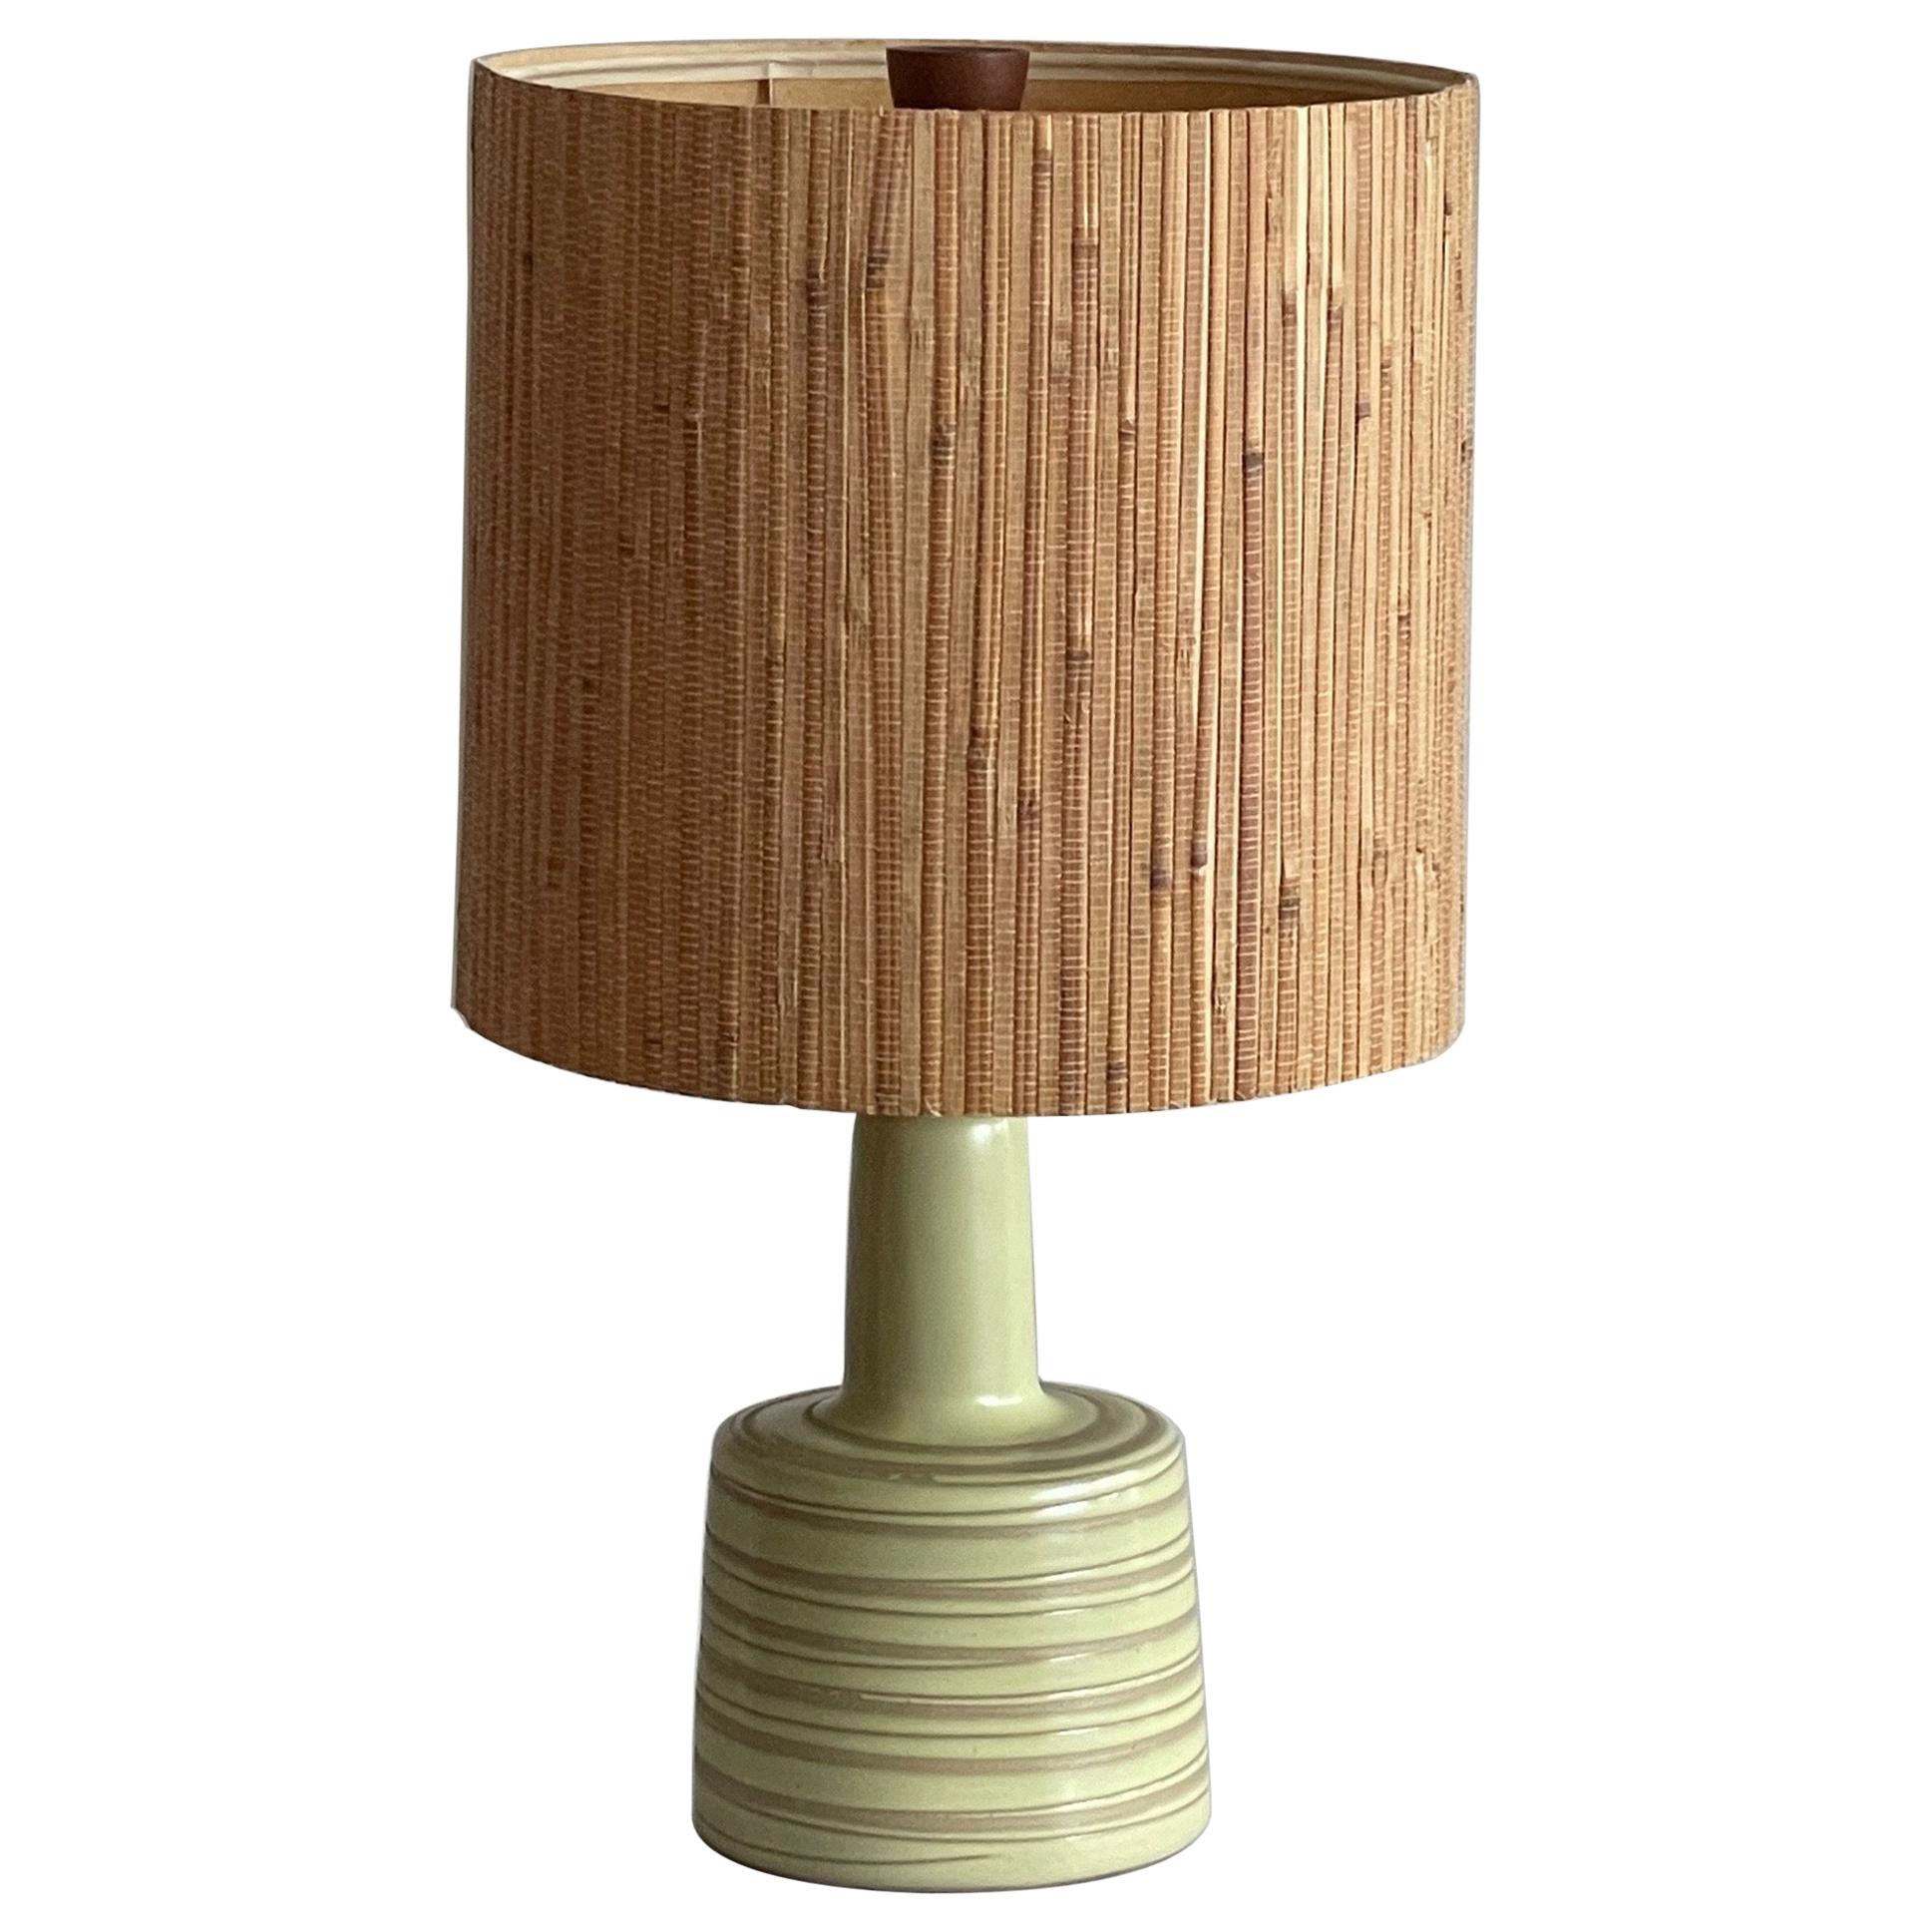 Charming Ceramic Lamp by Martz For Sale